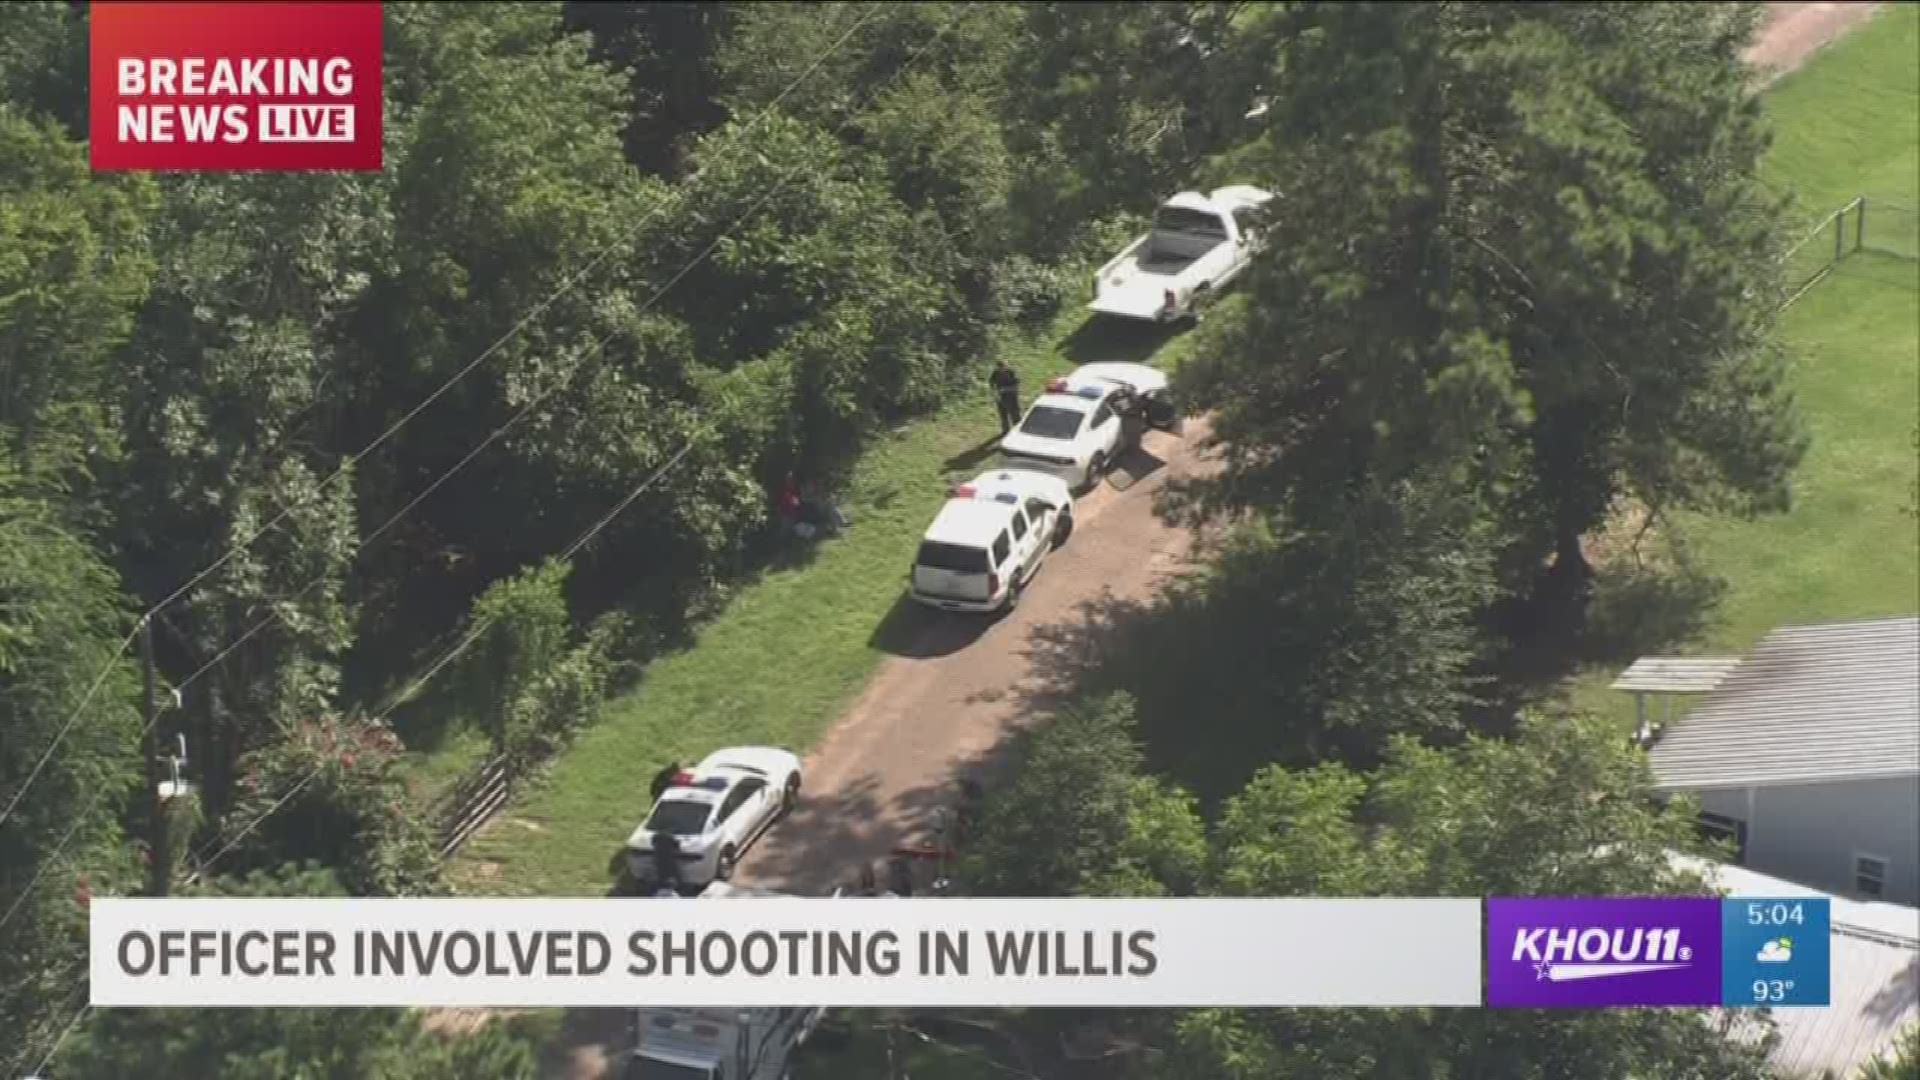 The Montgomery County Sheriff's Office is investigating an officer-involved shooting in Willis.